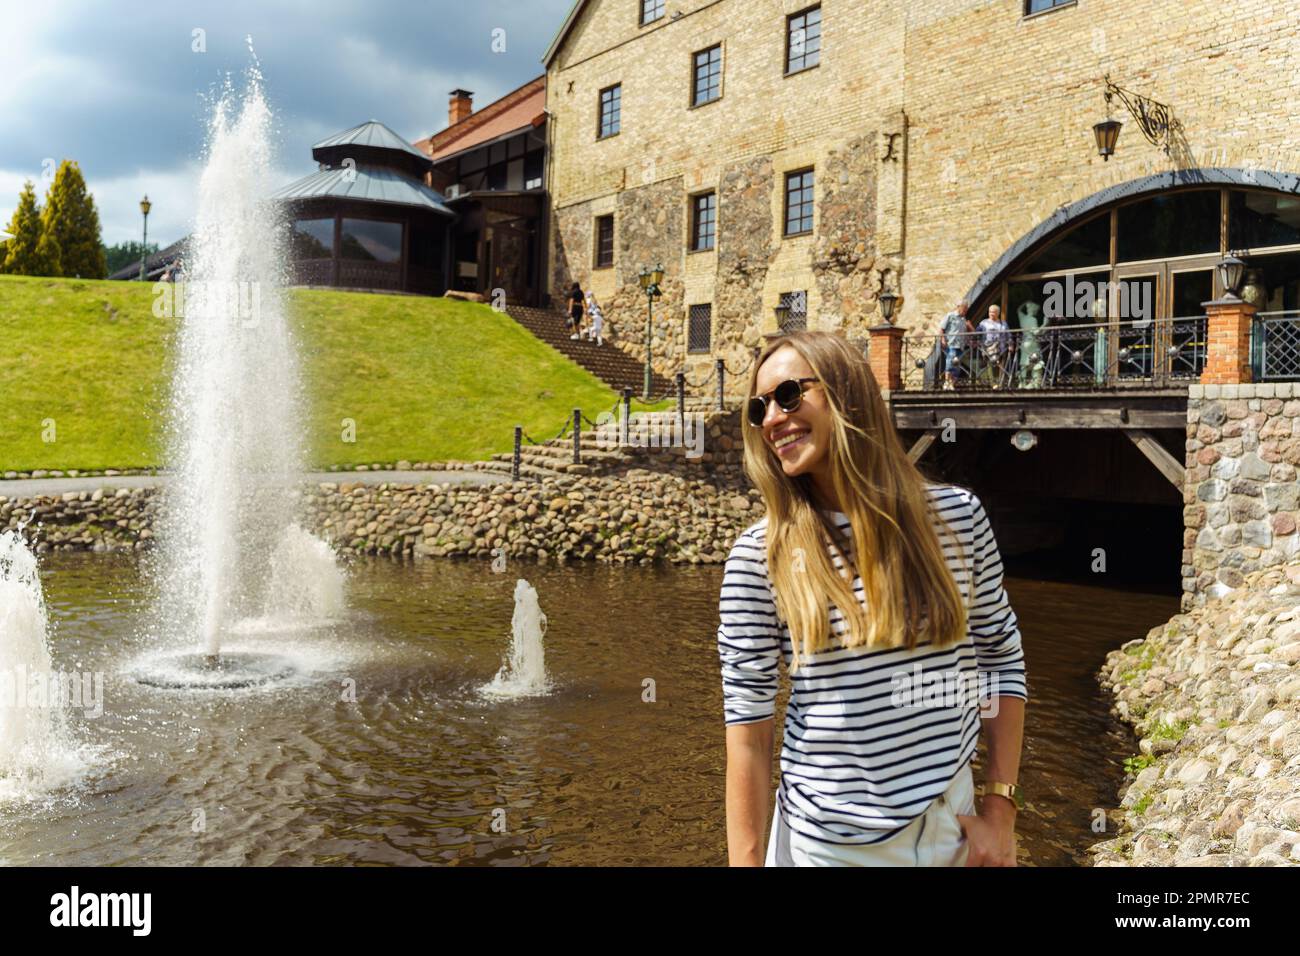 A long-haired woman in a striped jumper and sunglasses laughs next to a fountain in the summer. Stock Photo